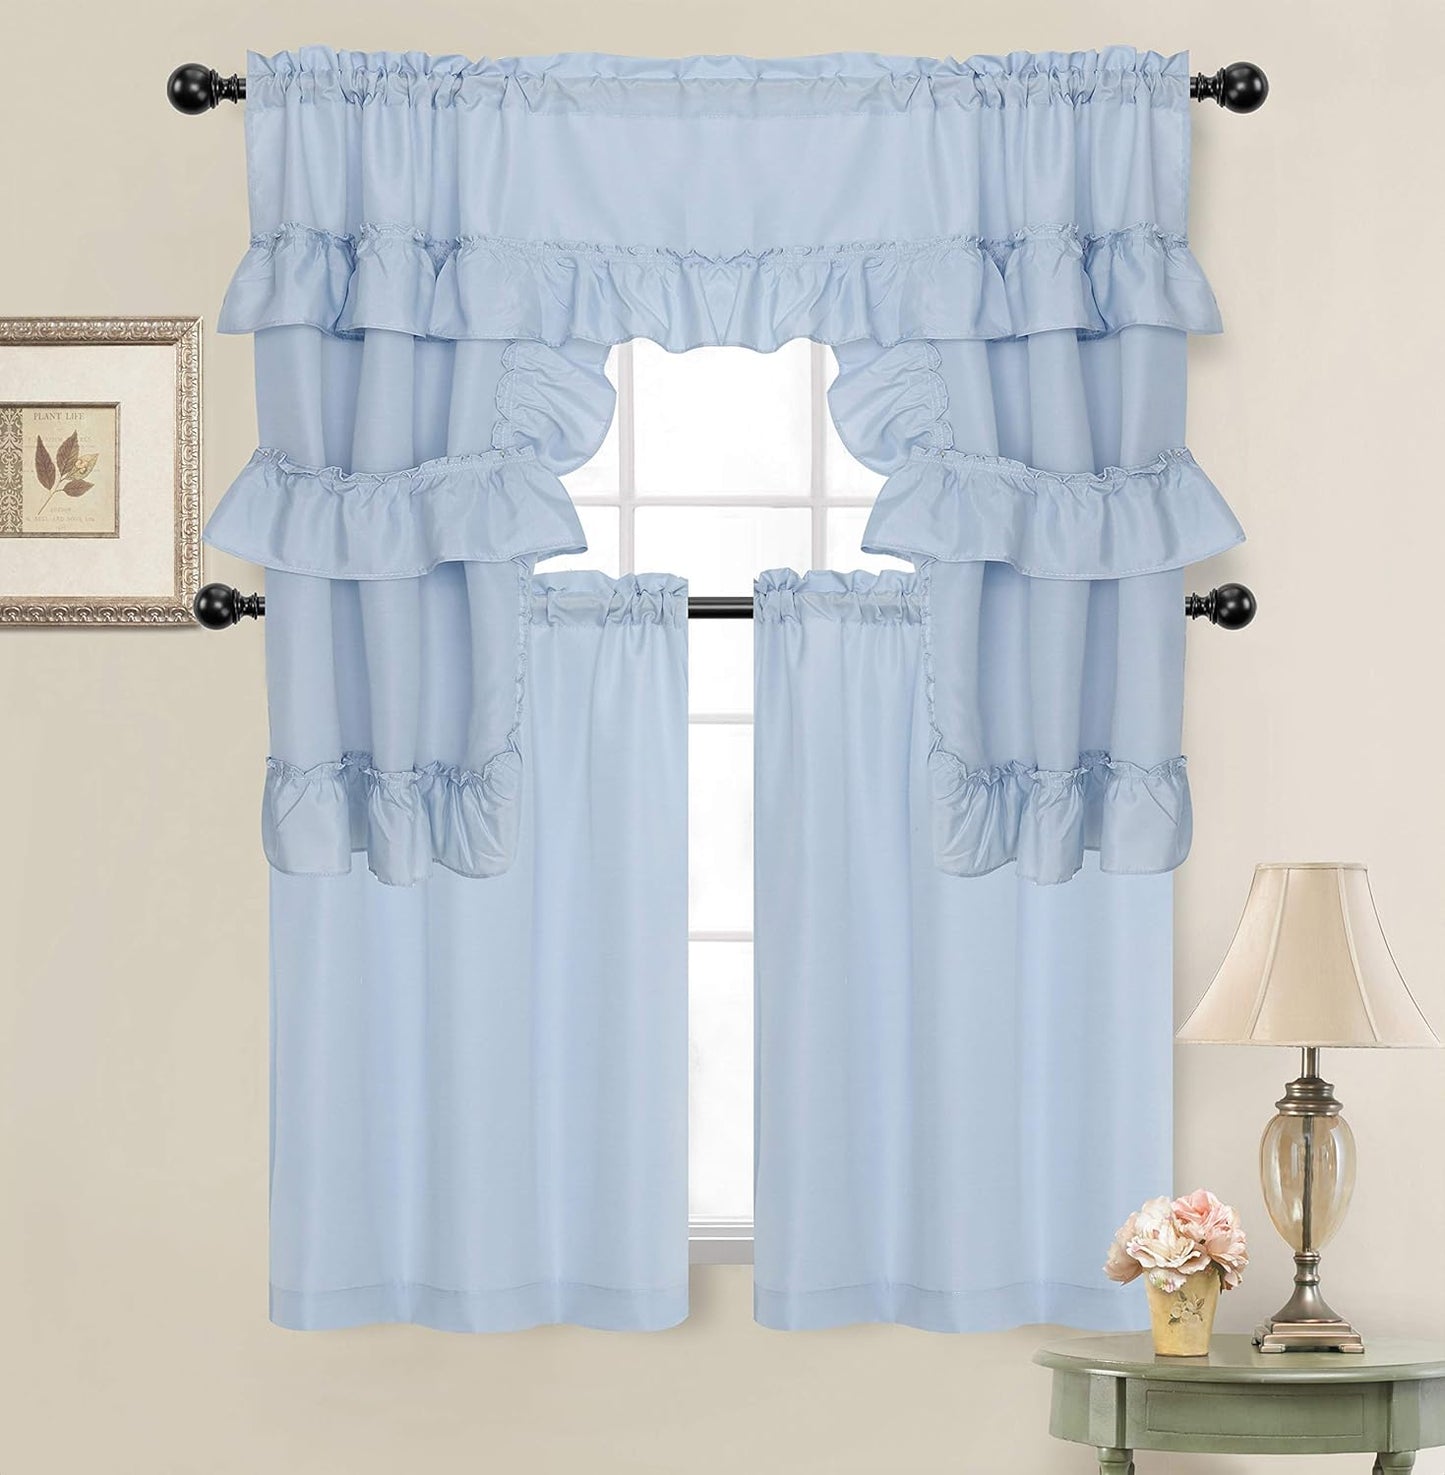 Goodgram Country Farmhouse Living Solid Colored Cafe Kitchen Curtain Tier & Swag Valance Set - Assorted Colors (White)  GoodGram Blue  